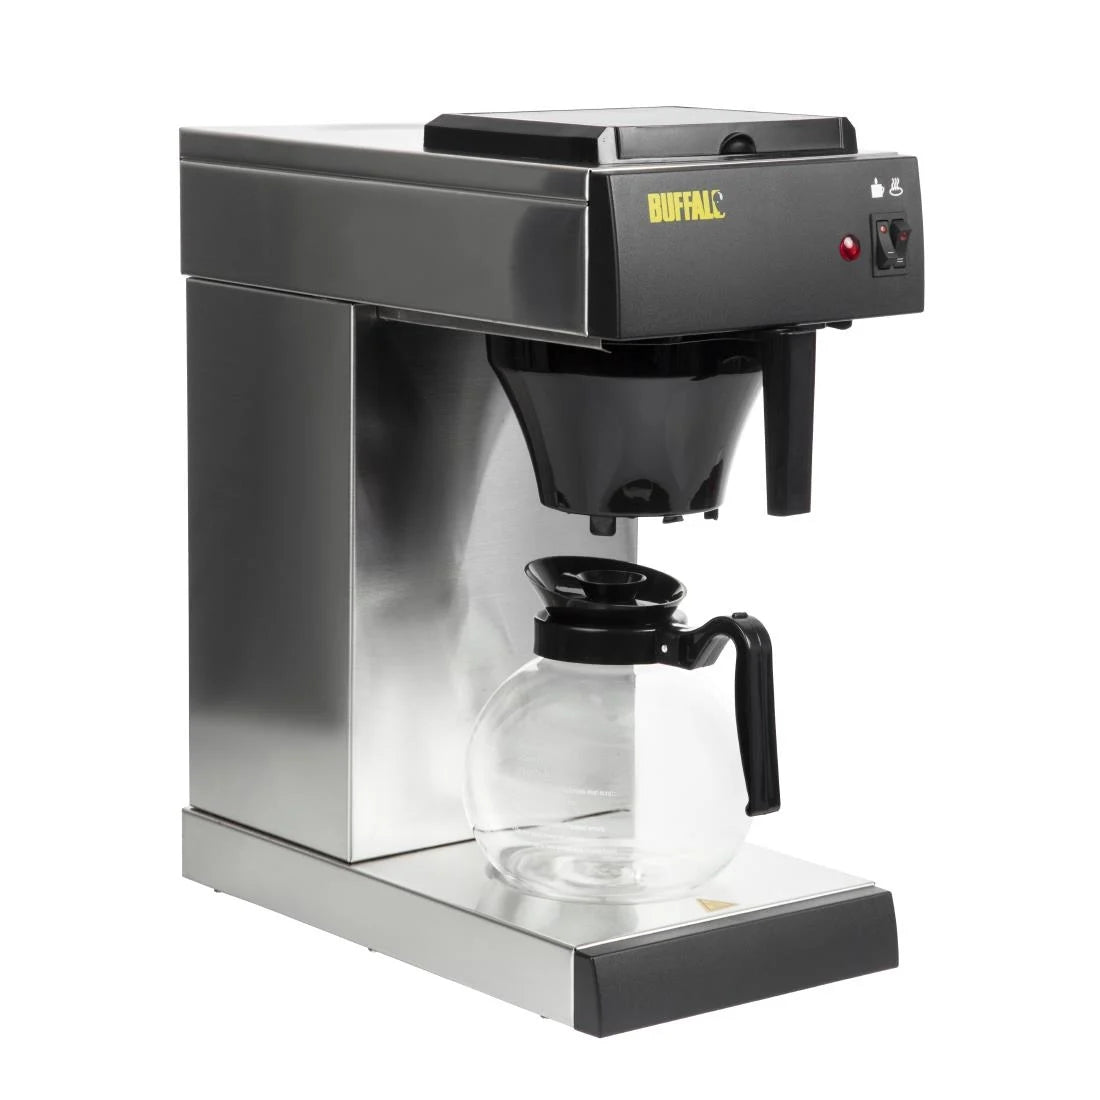 Buffalo Manual Fill Filter Coffee Machine.Product Ref:00564.MODEL:CT815.🚚 3-5 Days Delivery